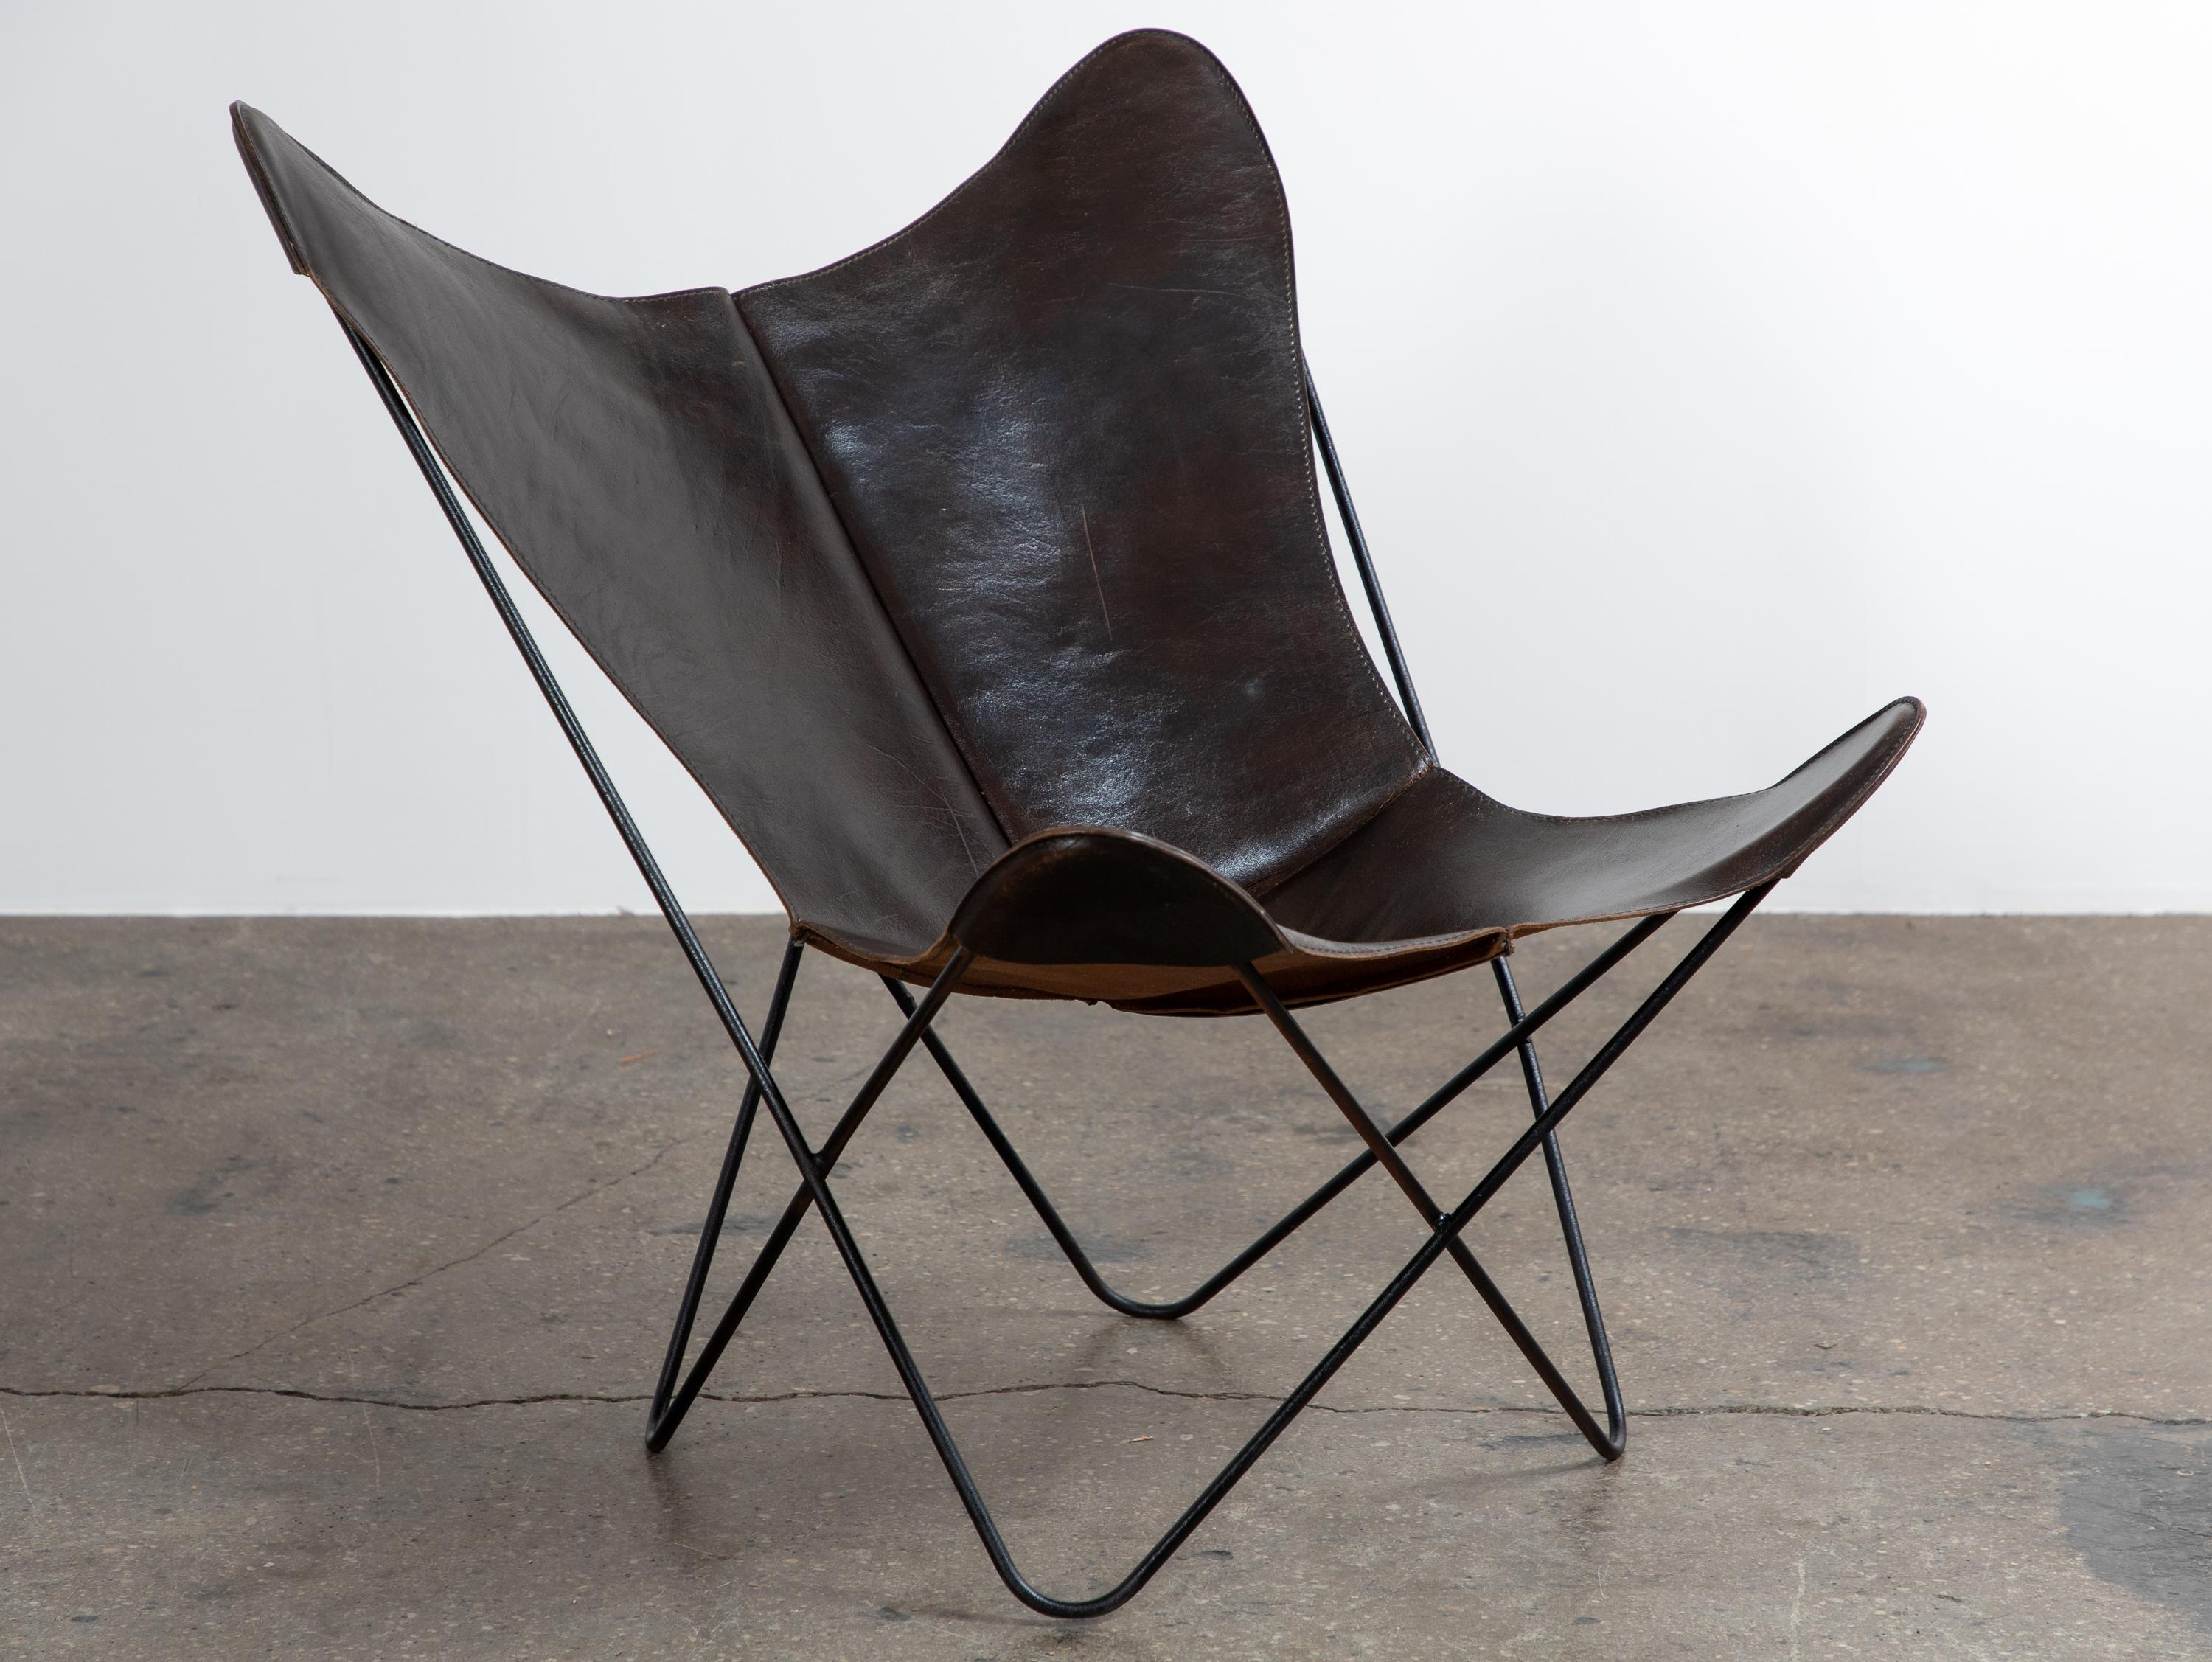 Vintage Butterfly Chair with chocolate brown  leather sling, designed by Antonio Bonet, Juan Kurchan & Jorge Ferrari-Hardoy, issued by Knoll. An iconic mid-century design with a relaxed and rugged vibe. The chair's distinctive look comes from a